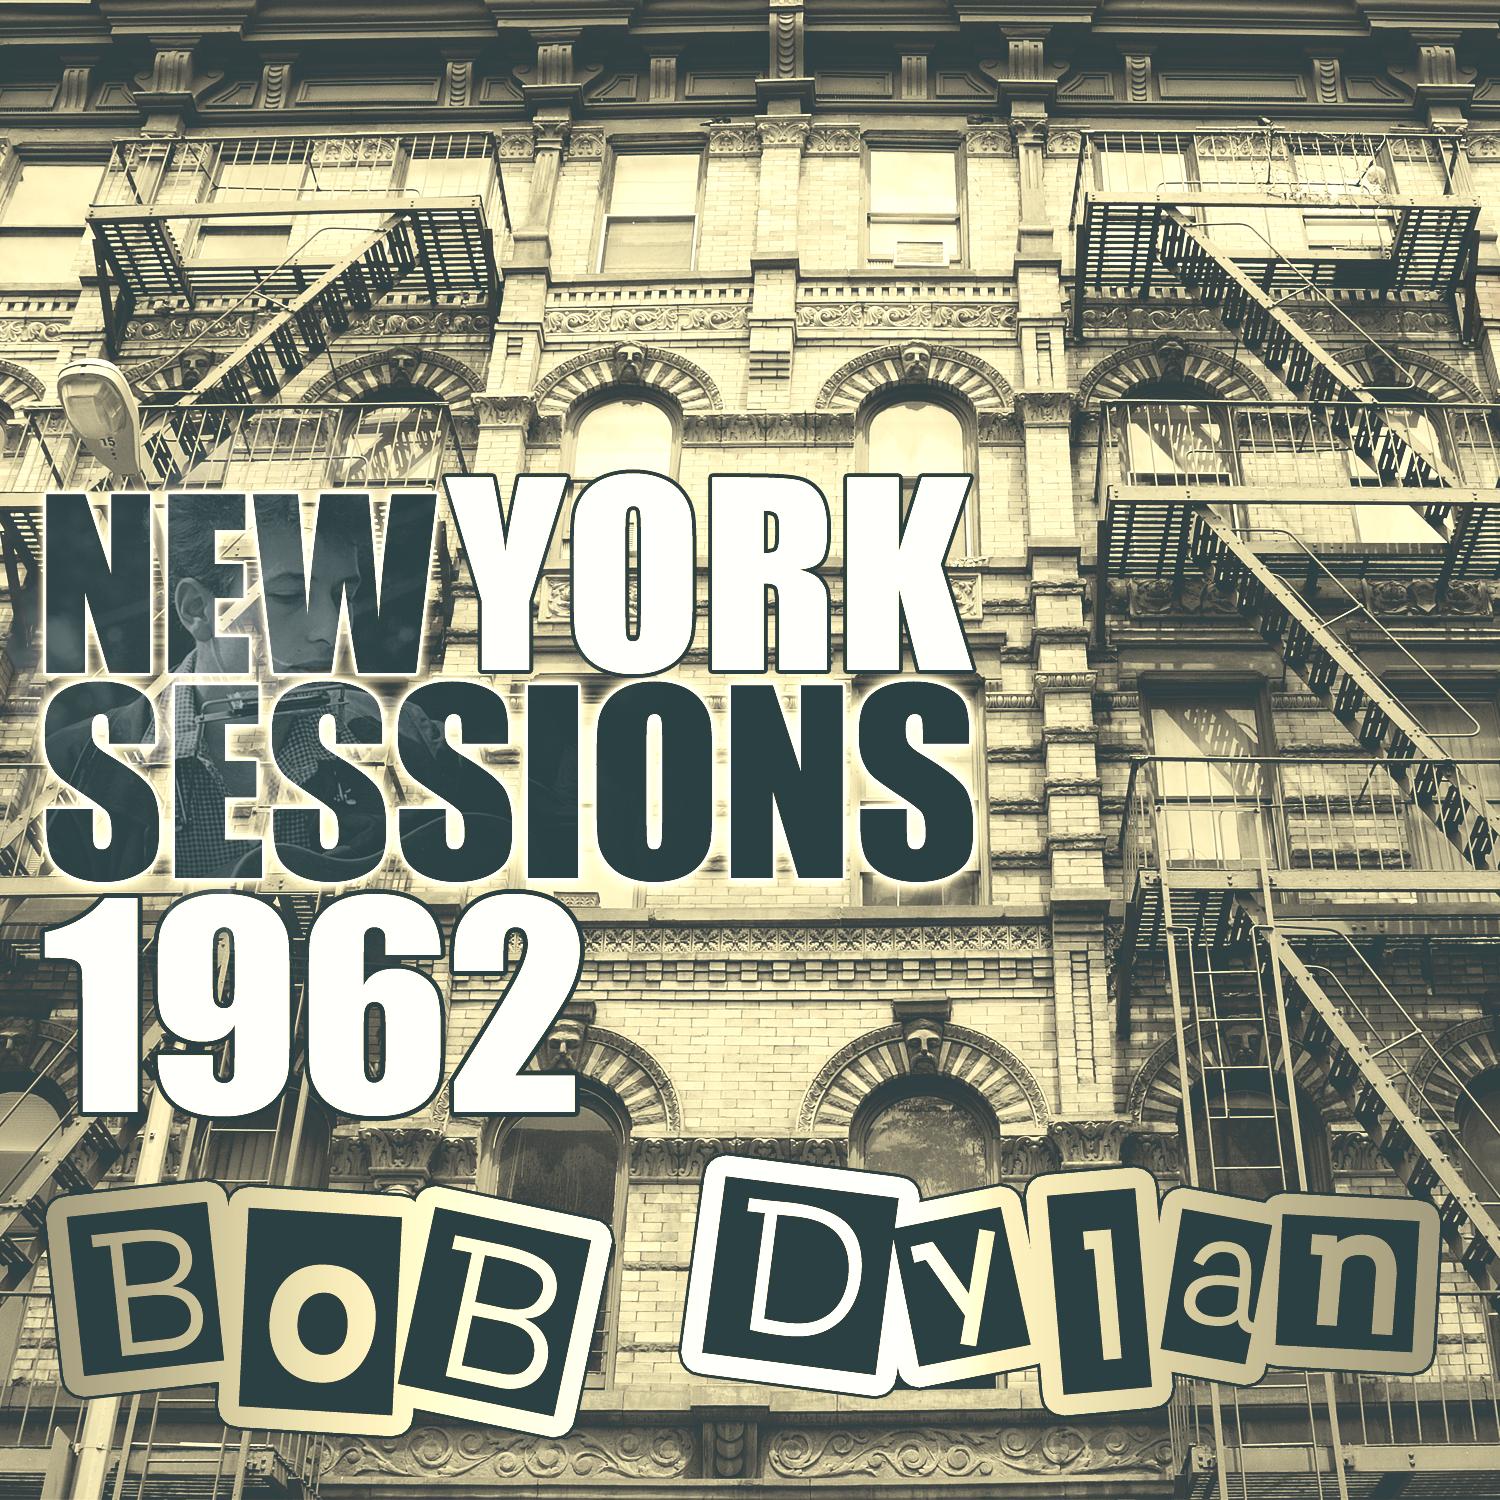 New York Sessions 1962